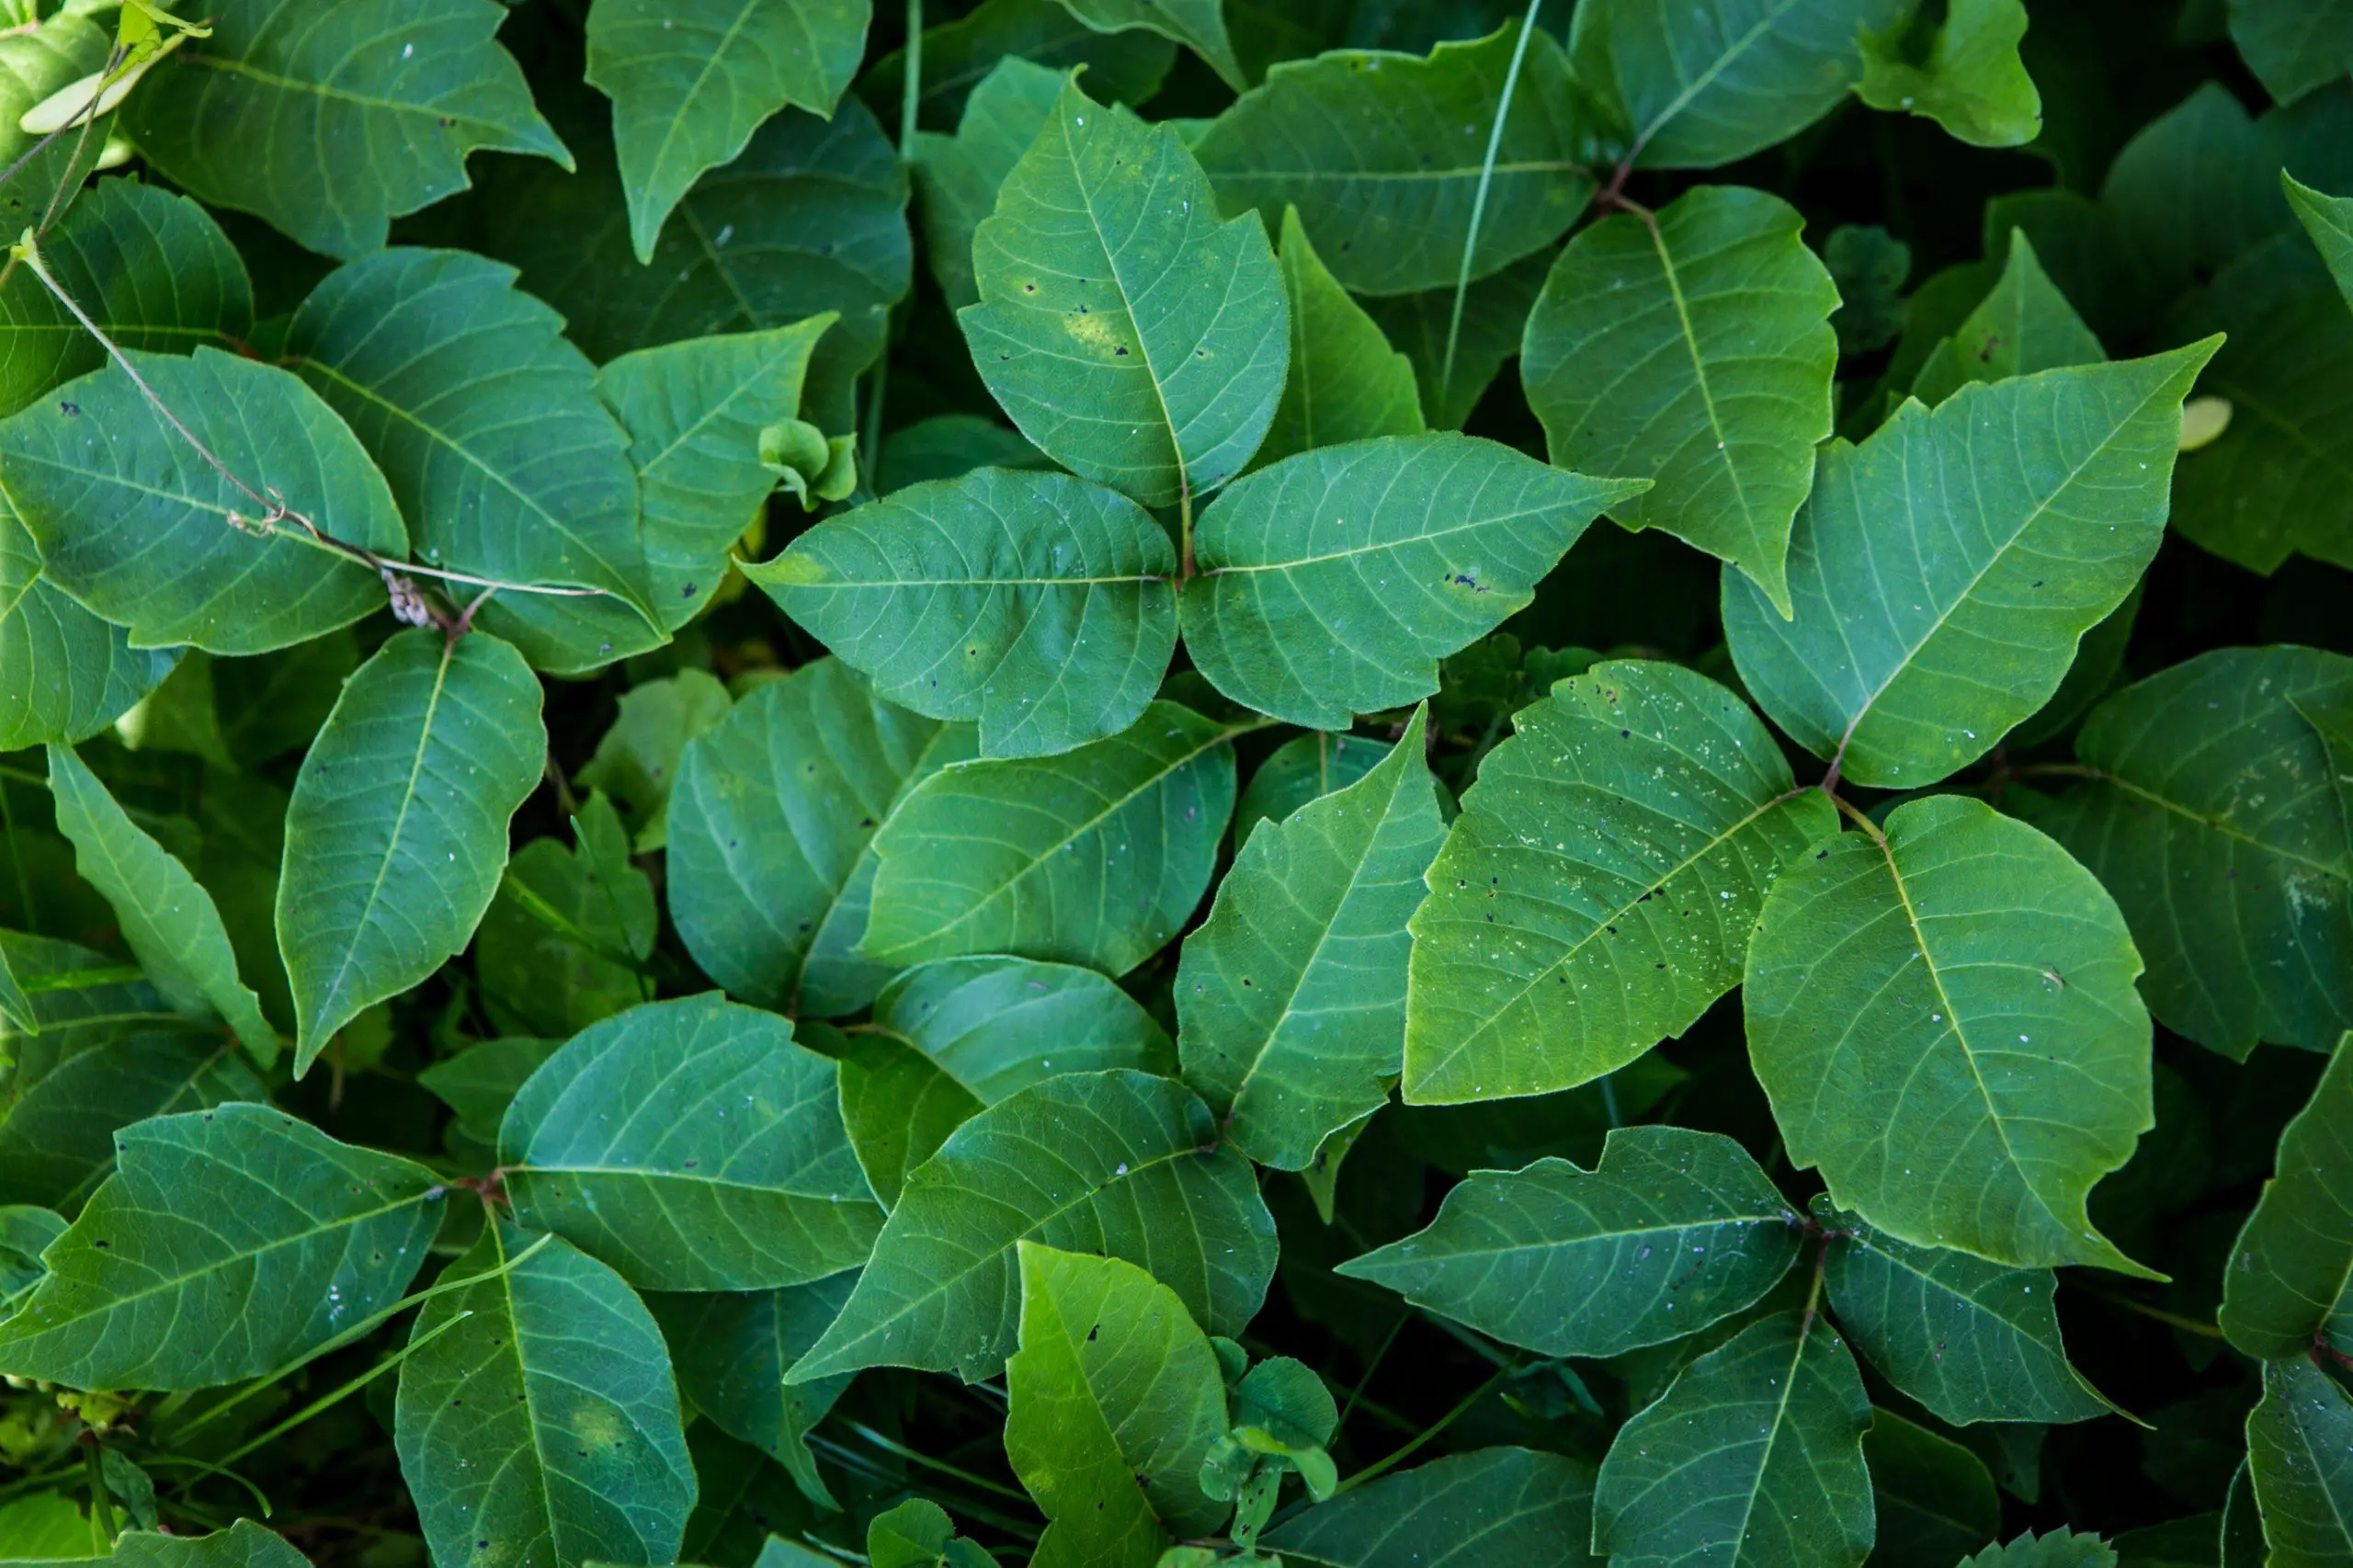 Close up picture of a dense group of poison ivy plants in the shade